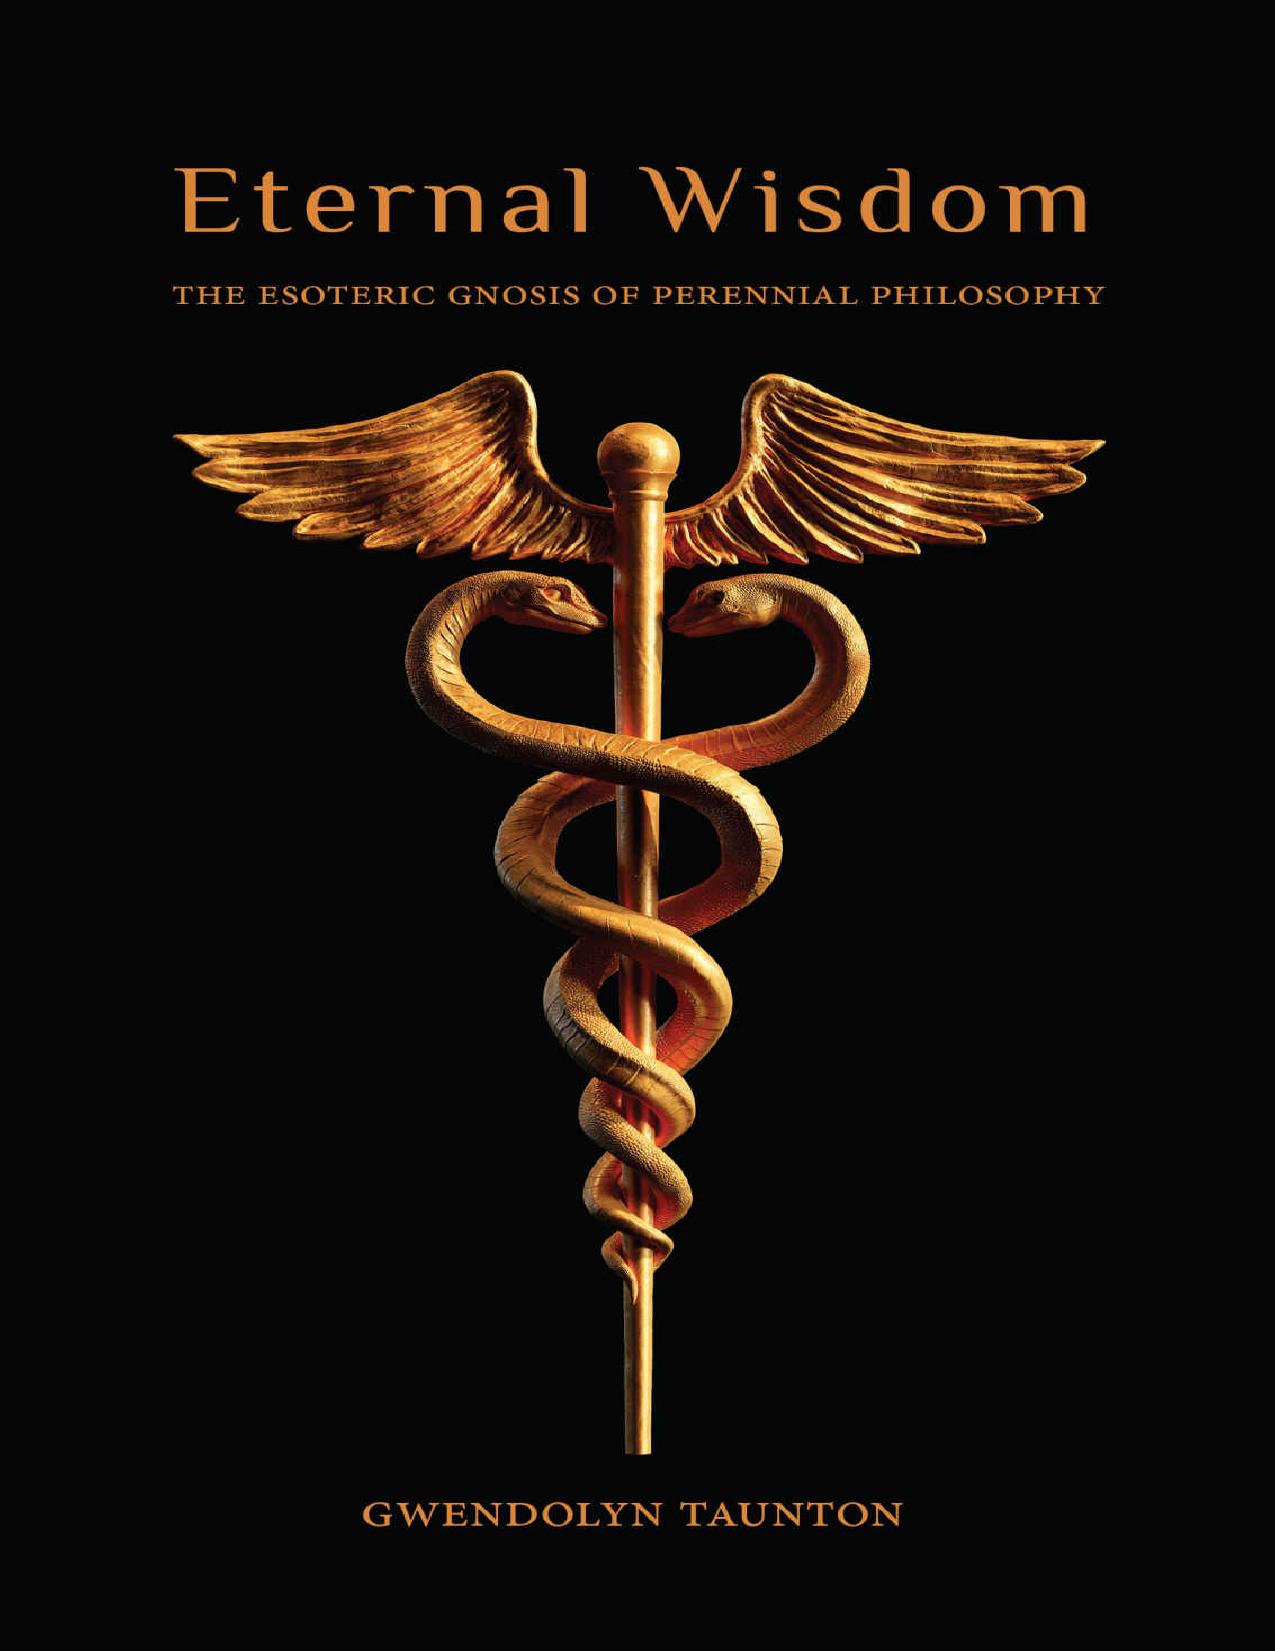 Eternal Wisdom: The Esoteric Gnosis of Perennial Philosophy